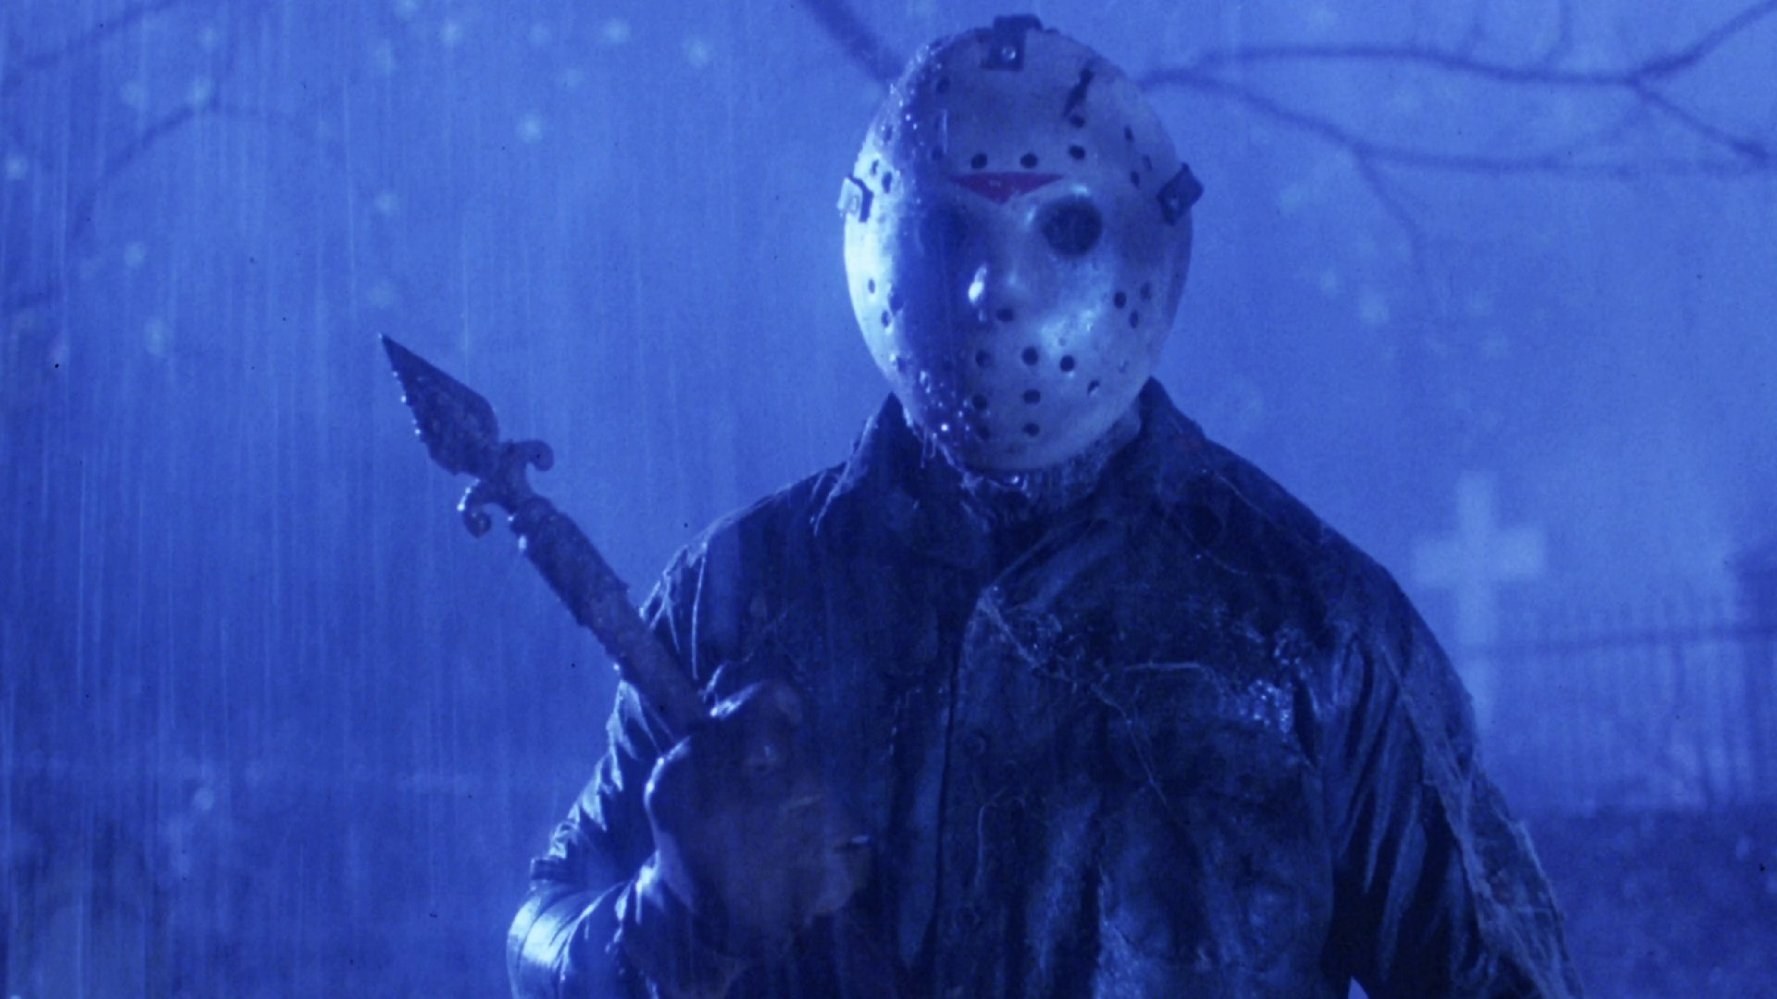 Revisiting the Friday the 13th series - Part One